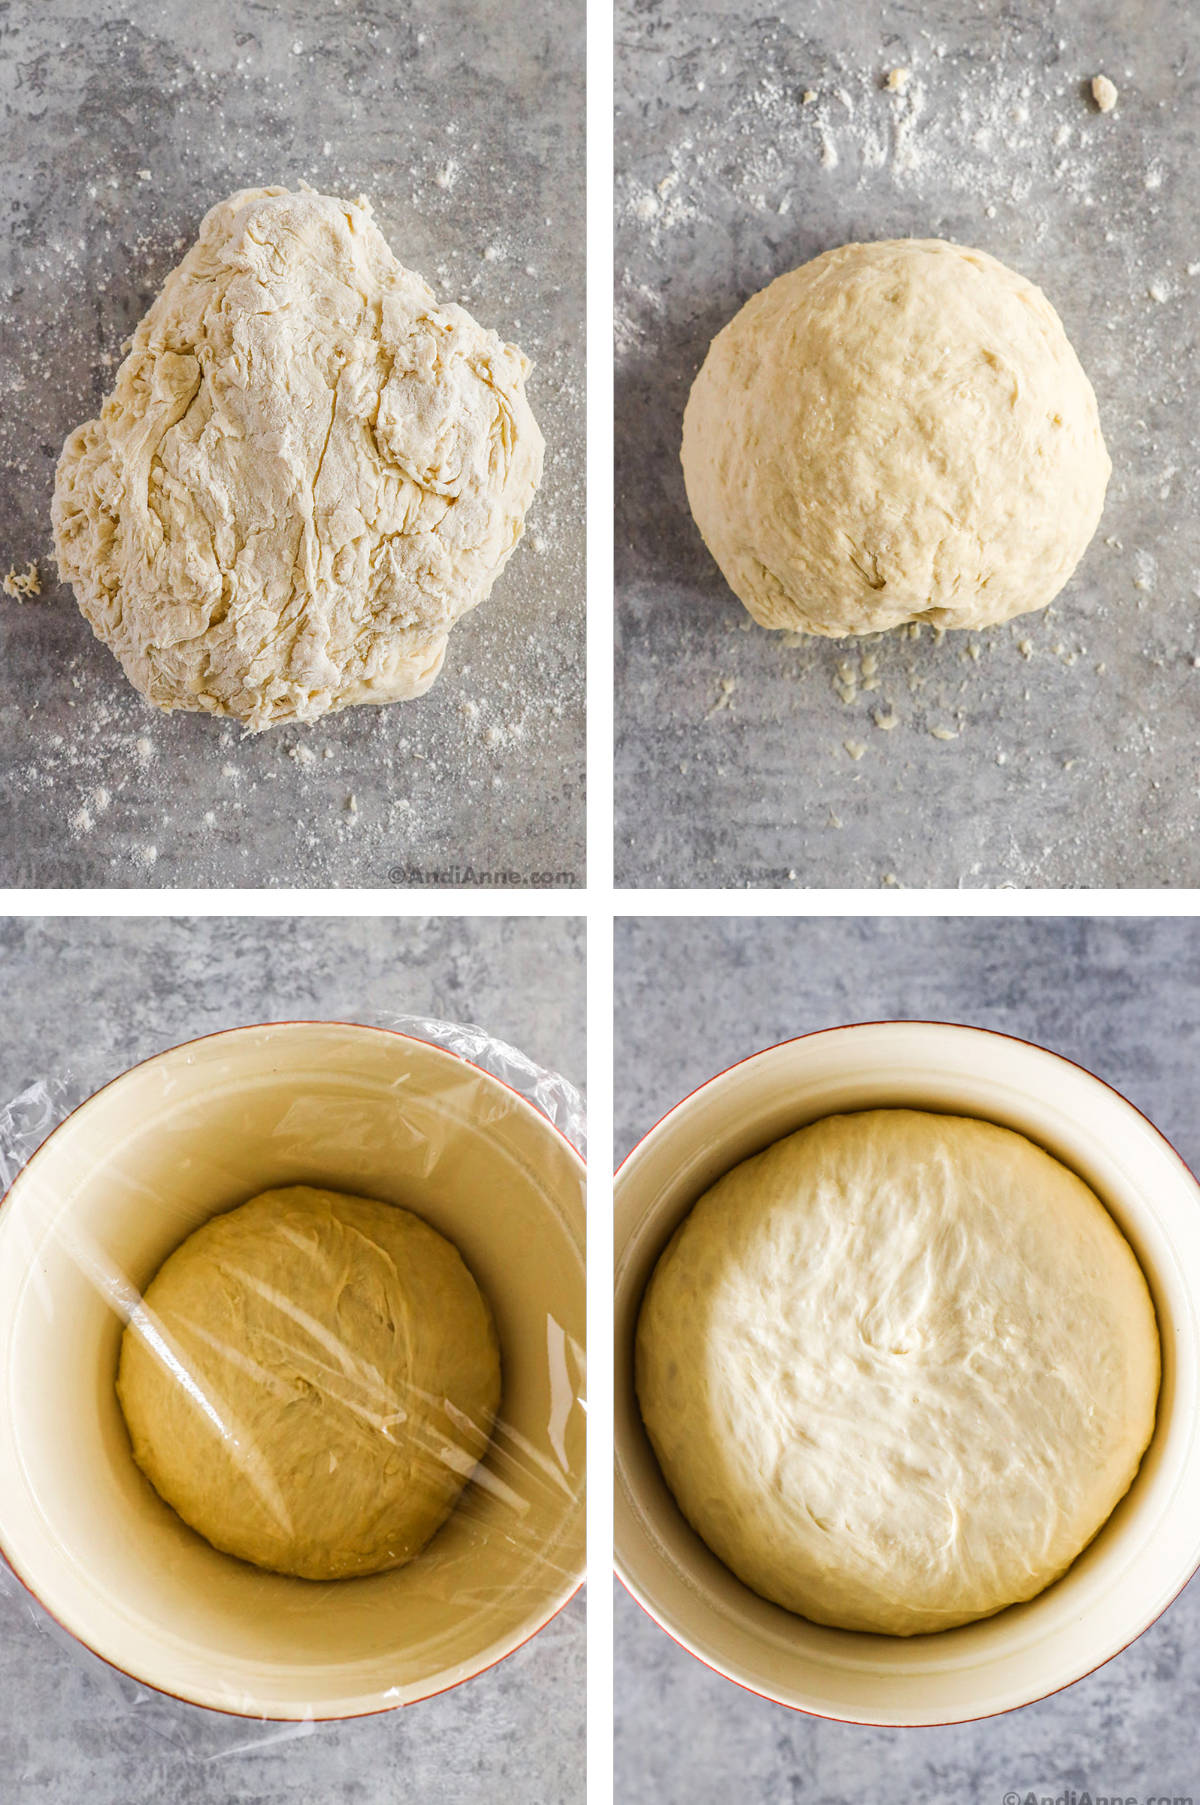 Four images in one: 1. Dough is added to tabletop and kneaded. 2. Dough is in a ball. 3. dough is in a bowl with saran wrap on top. 4. Dough has doubled in size in bowl. 